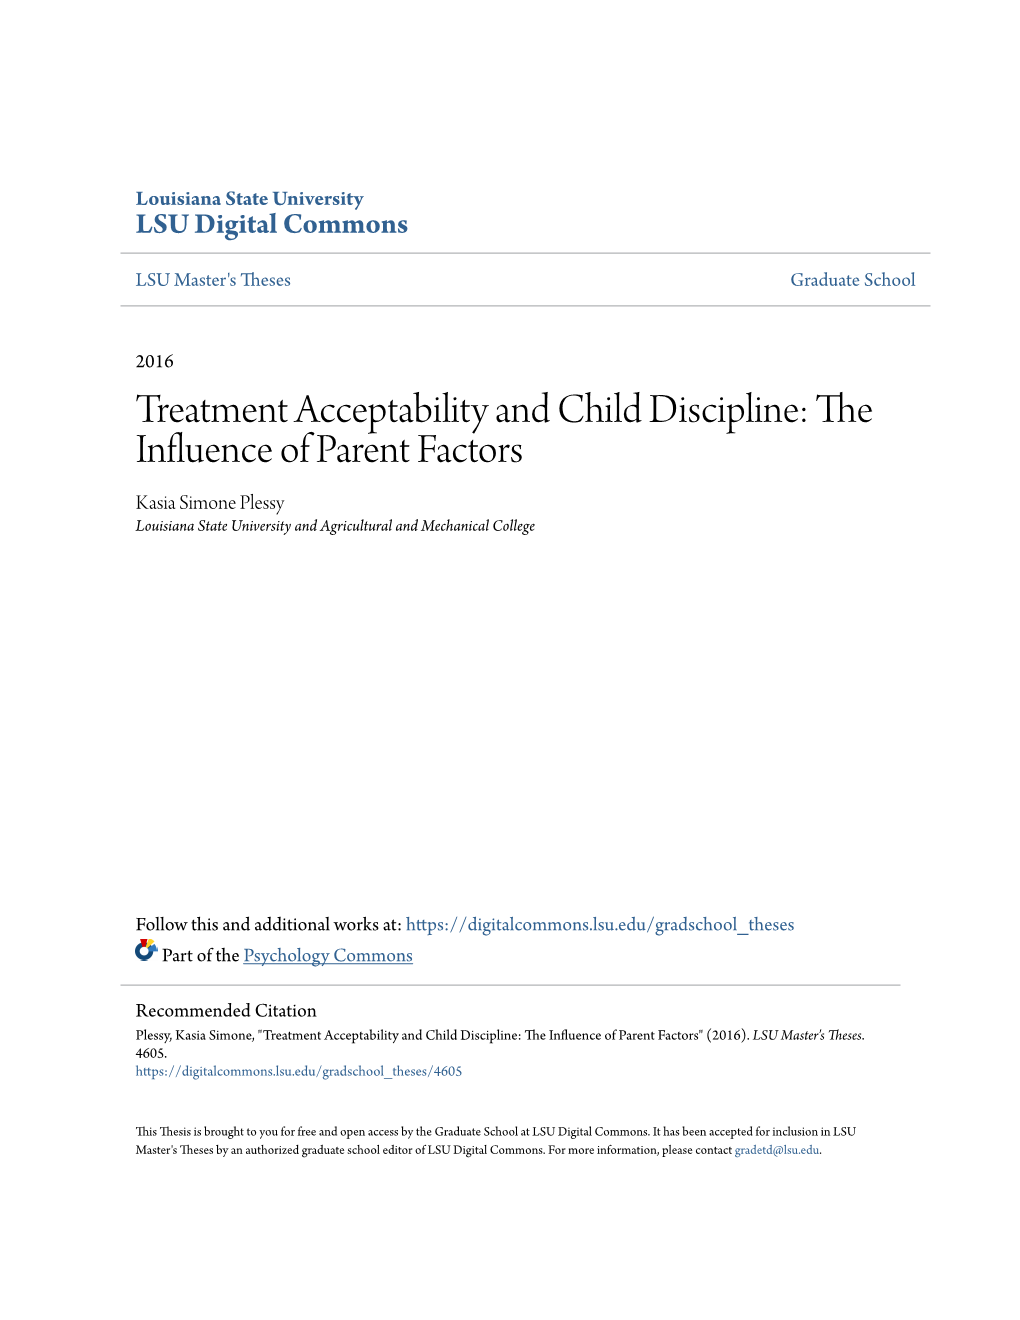 Treatment Acceptability and Child Discipline: the Influence of Parent Factors Kasia Simone Plessy Louisiana State University and Agricultural and Mechanical College